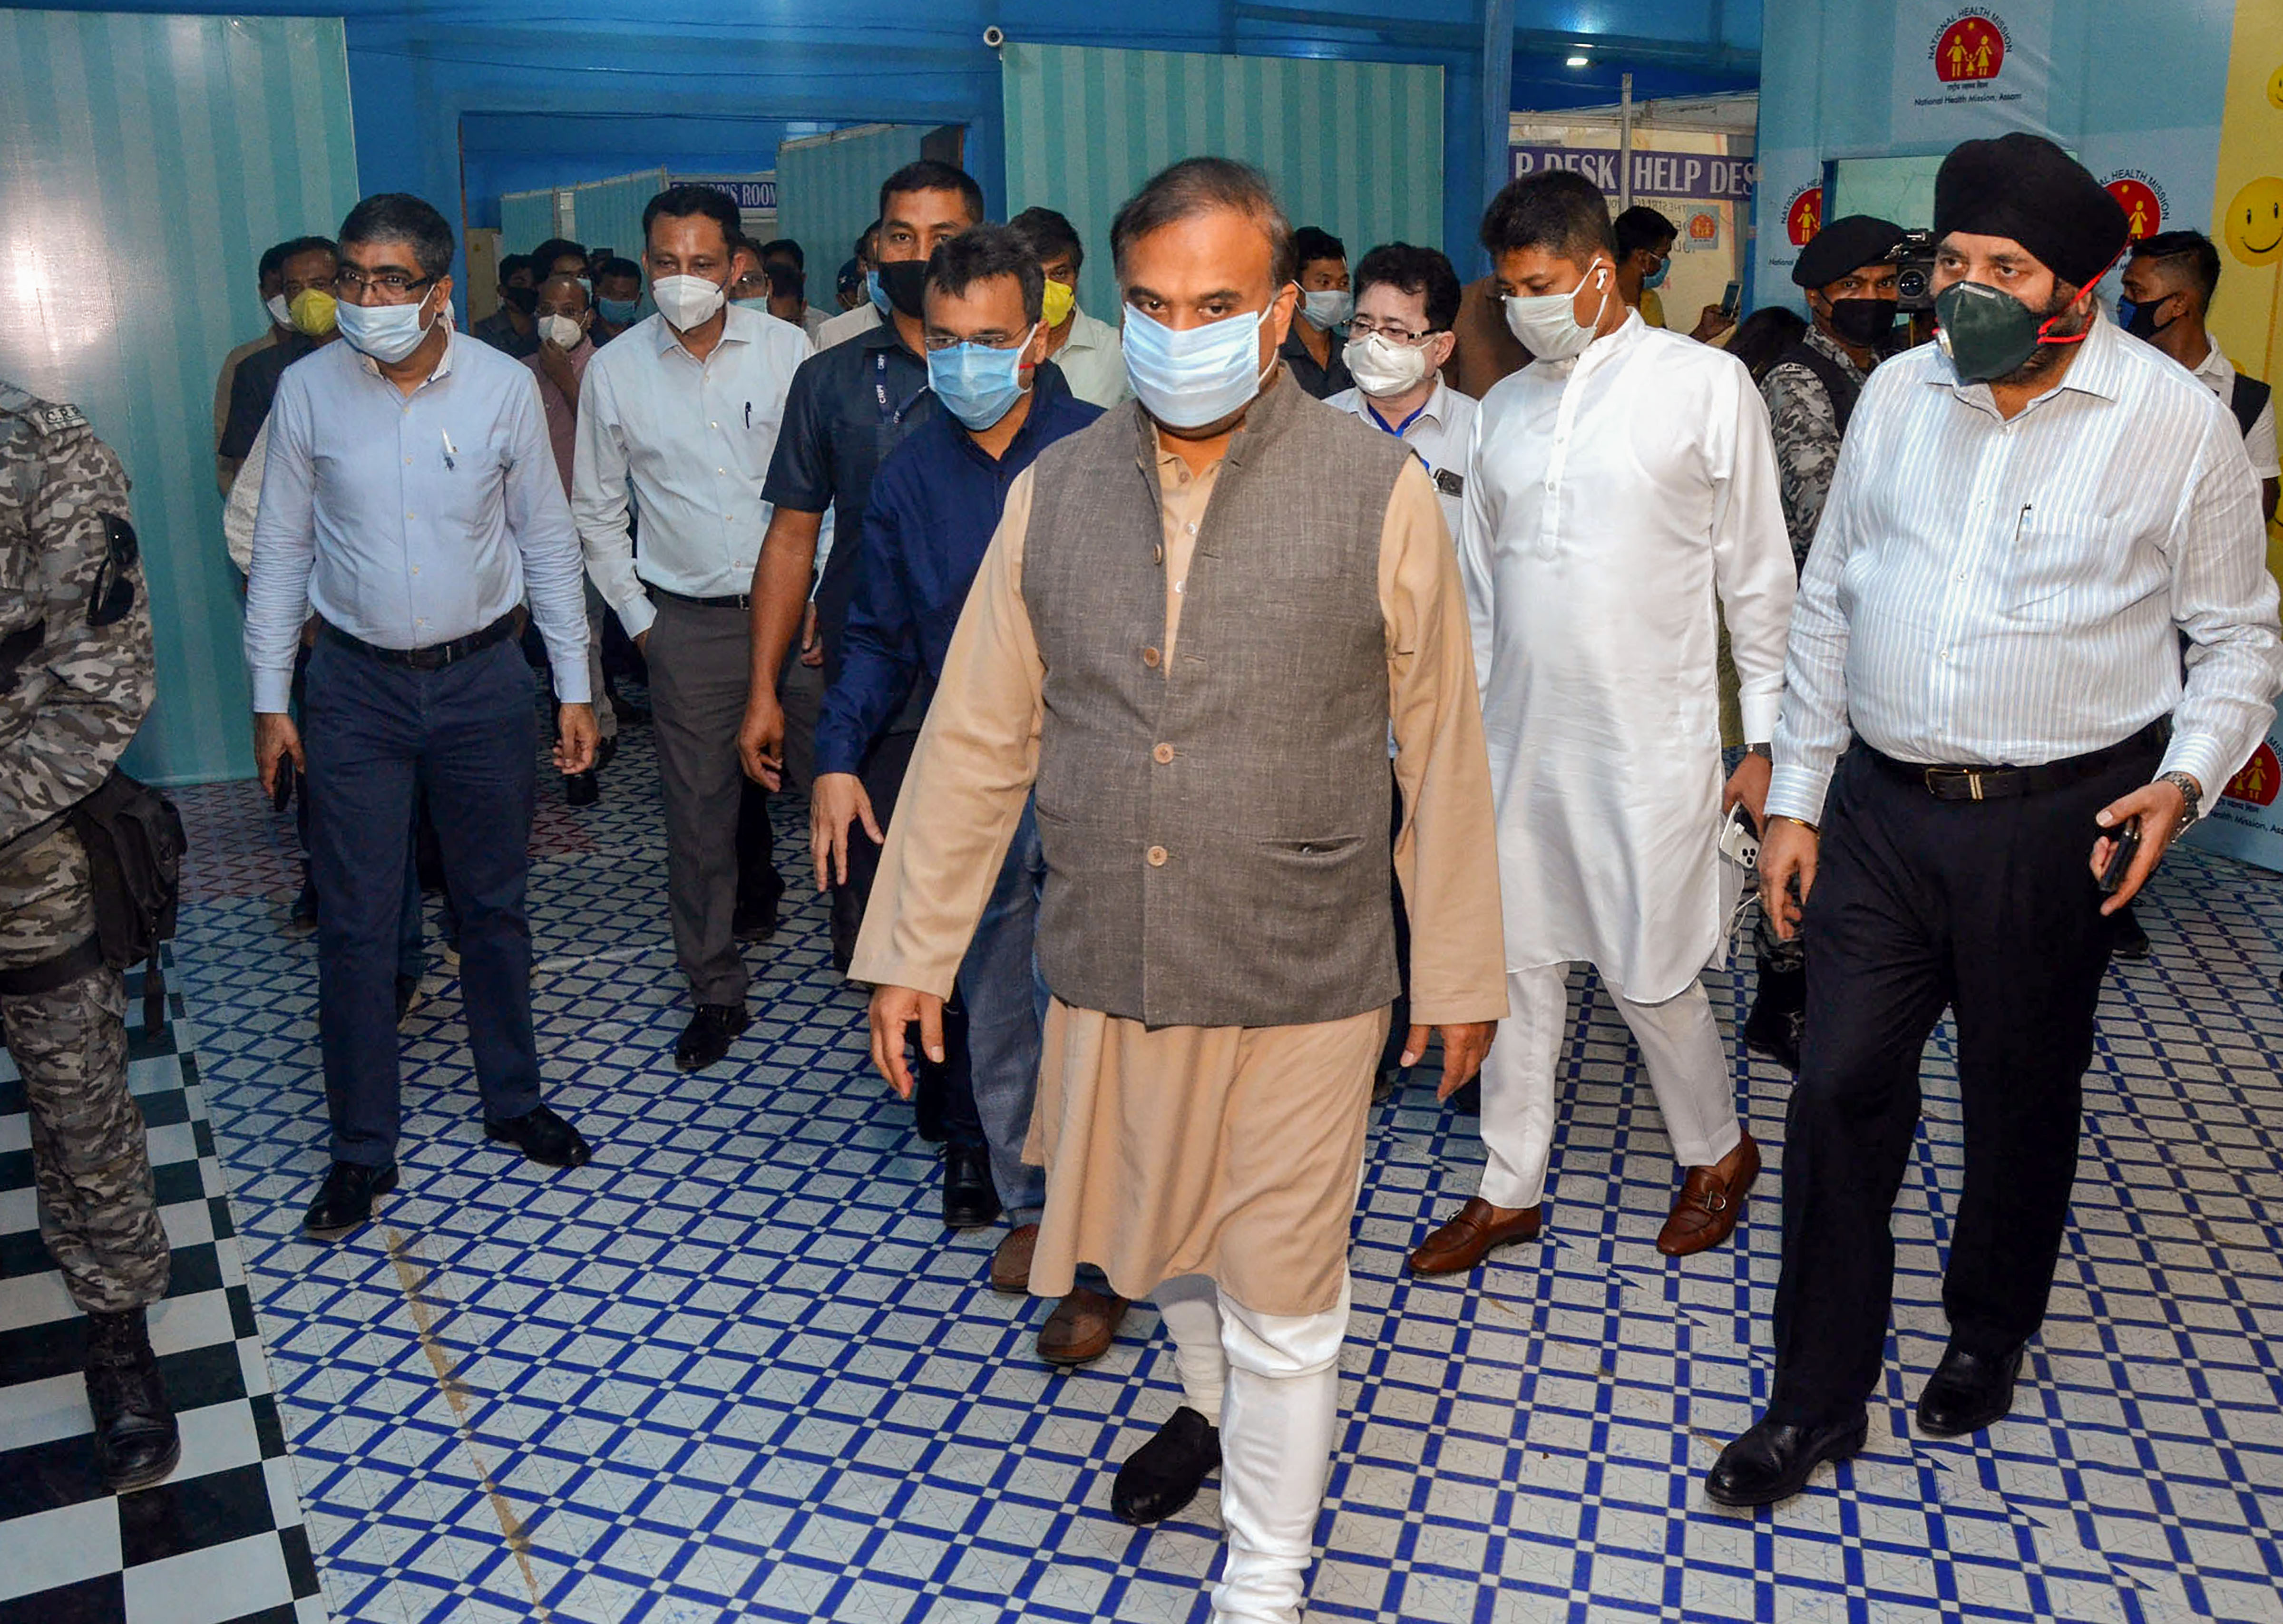 Assam State Finance Minister Himanta Biswa Sarma reviews a quarantine centre setup for COVID19 patients during the nationwide lockdown, at Sarusojoi Sports Complex, in Guwahati on Monday.